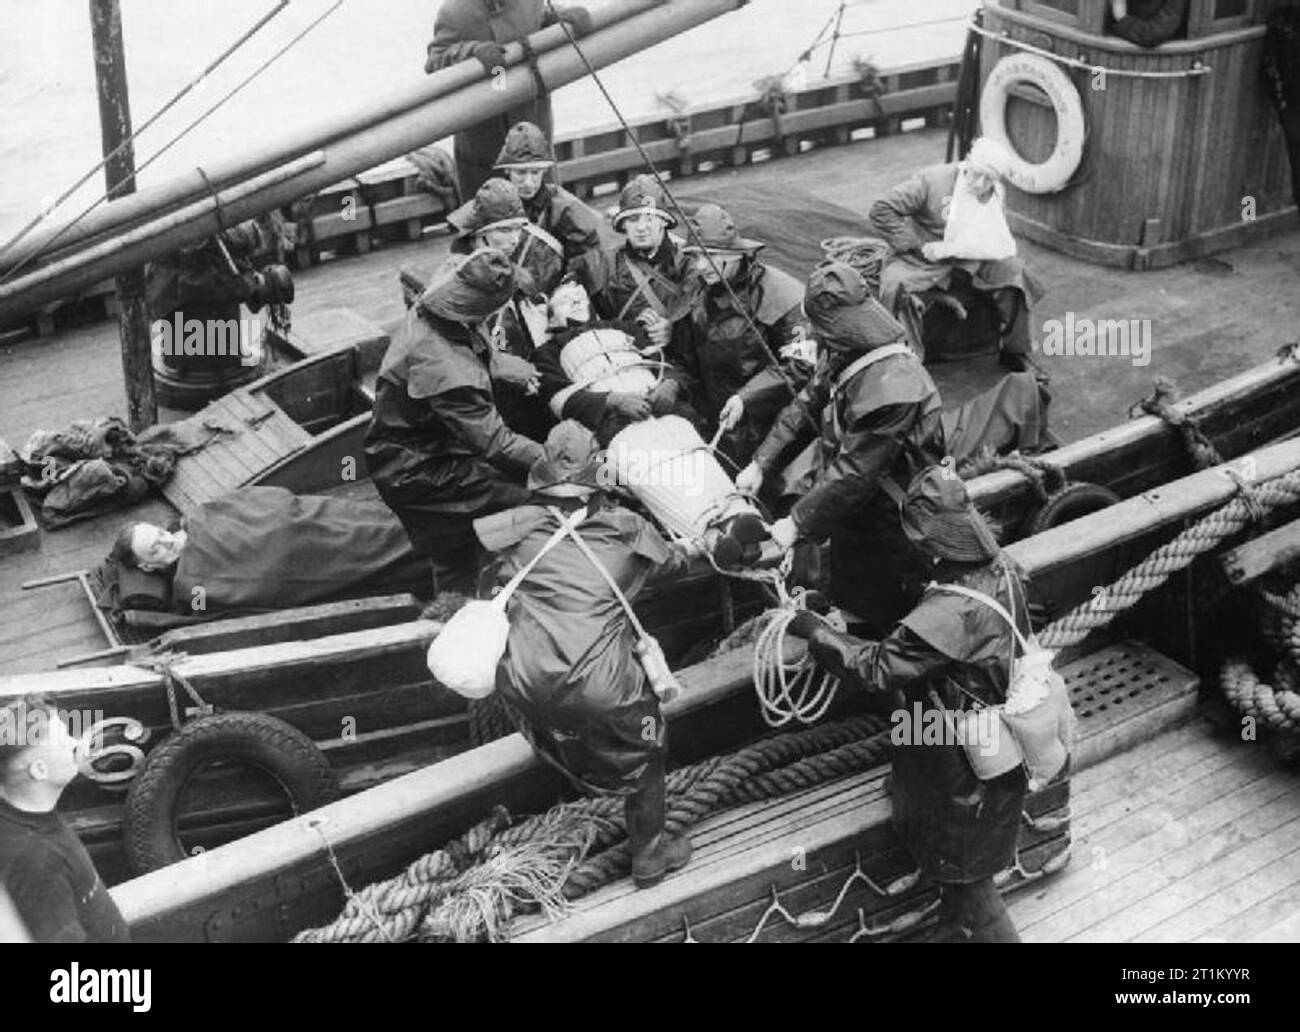 Air Raid Precautions, 1940 Air Raid Precautions (ARP) Marines based at Grimsby, move a stretcher case 'casualty' between vessels during a training exercise in assisting 'victims' of air raids off the coast of Britain, 23 February 1940. Stock Photo